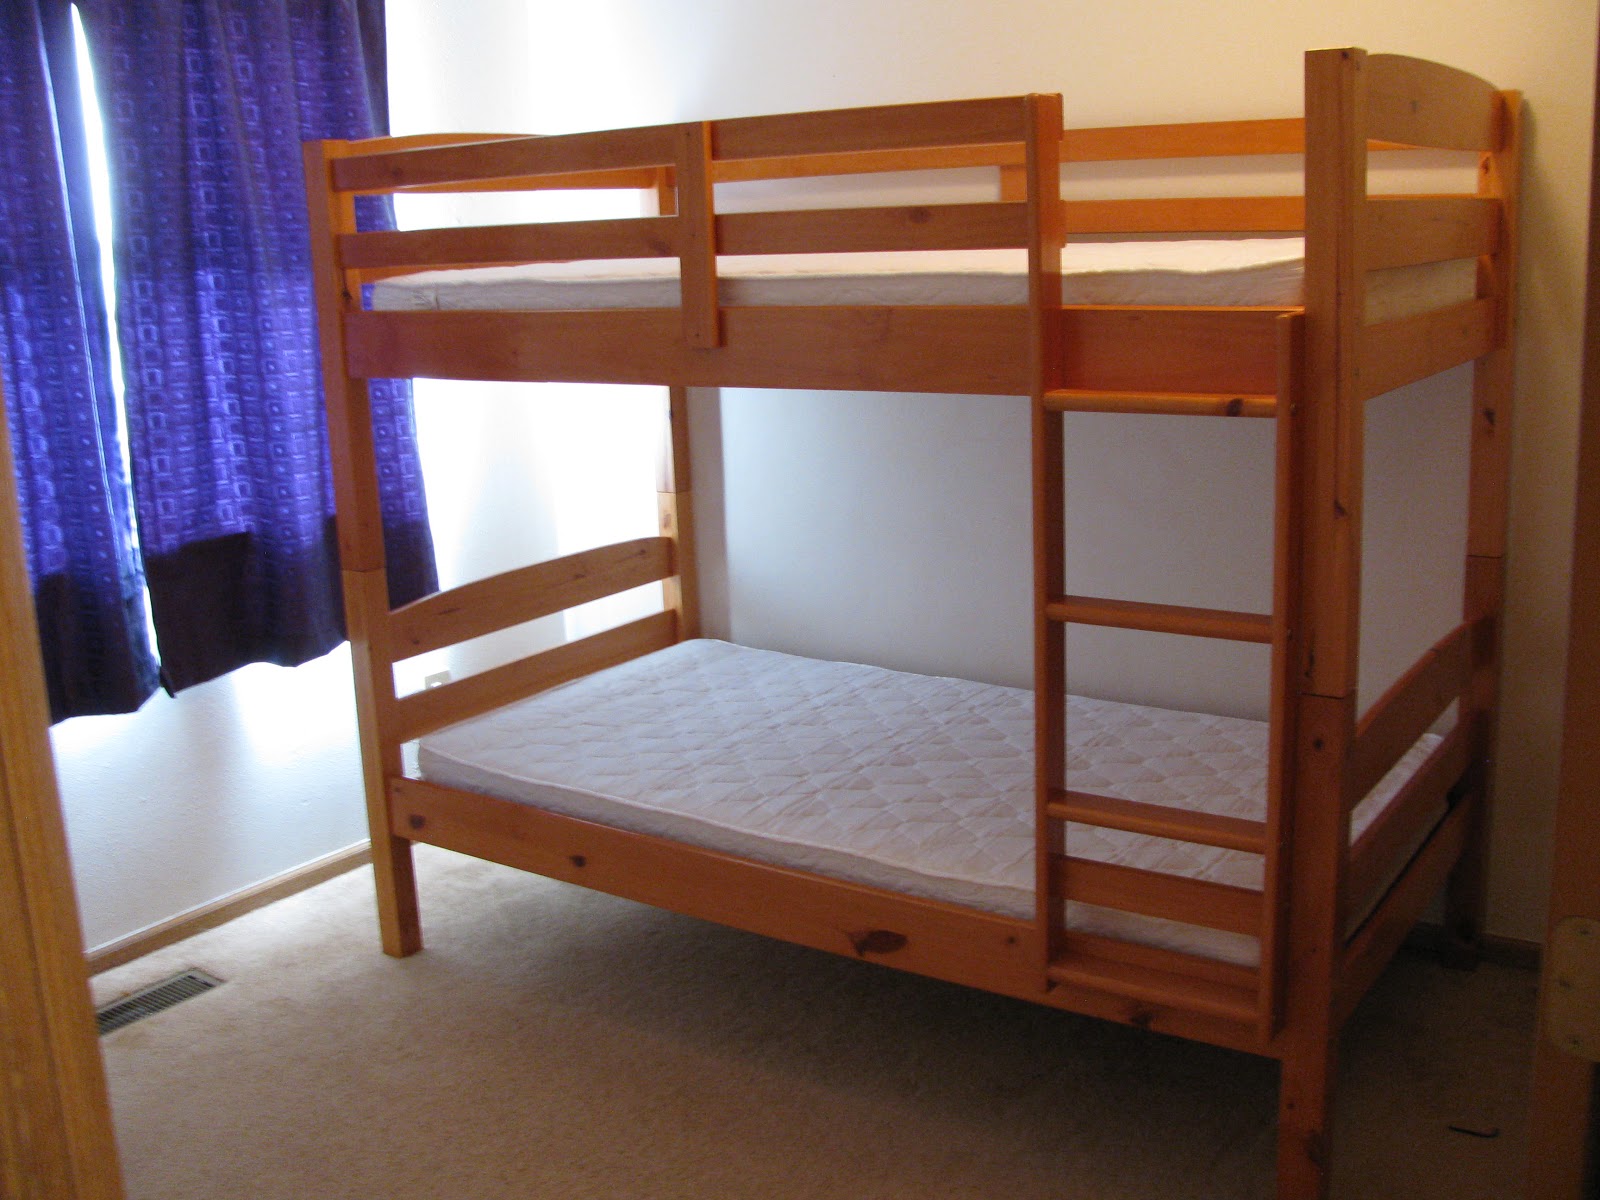 Ing Bunk Beds, This End Up Bunk Beds Craigslist